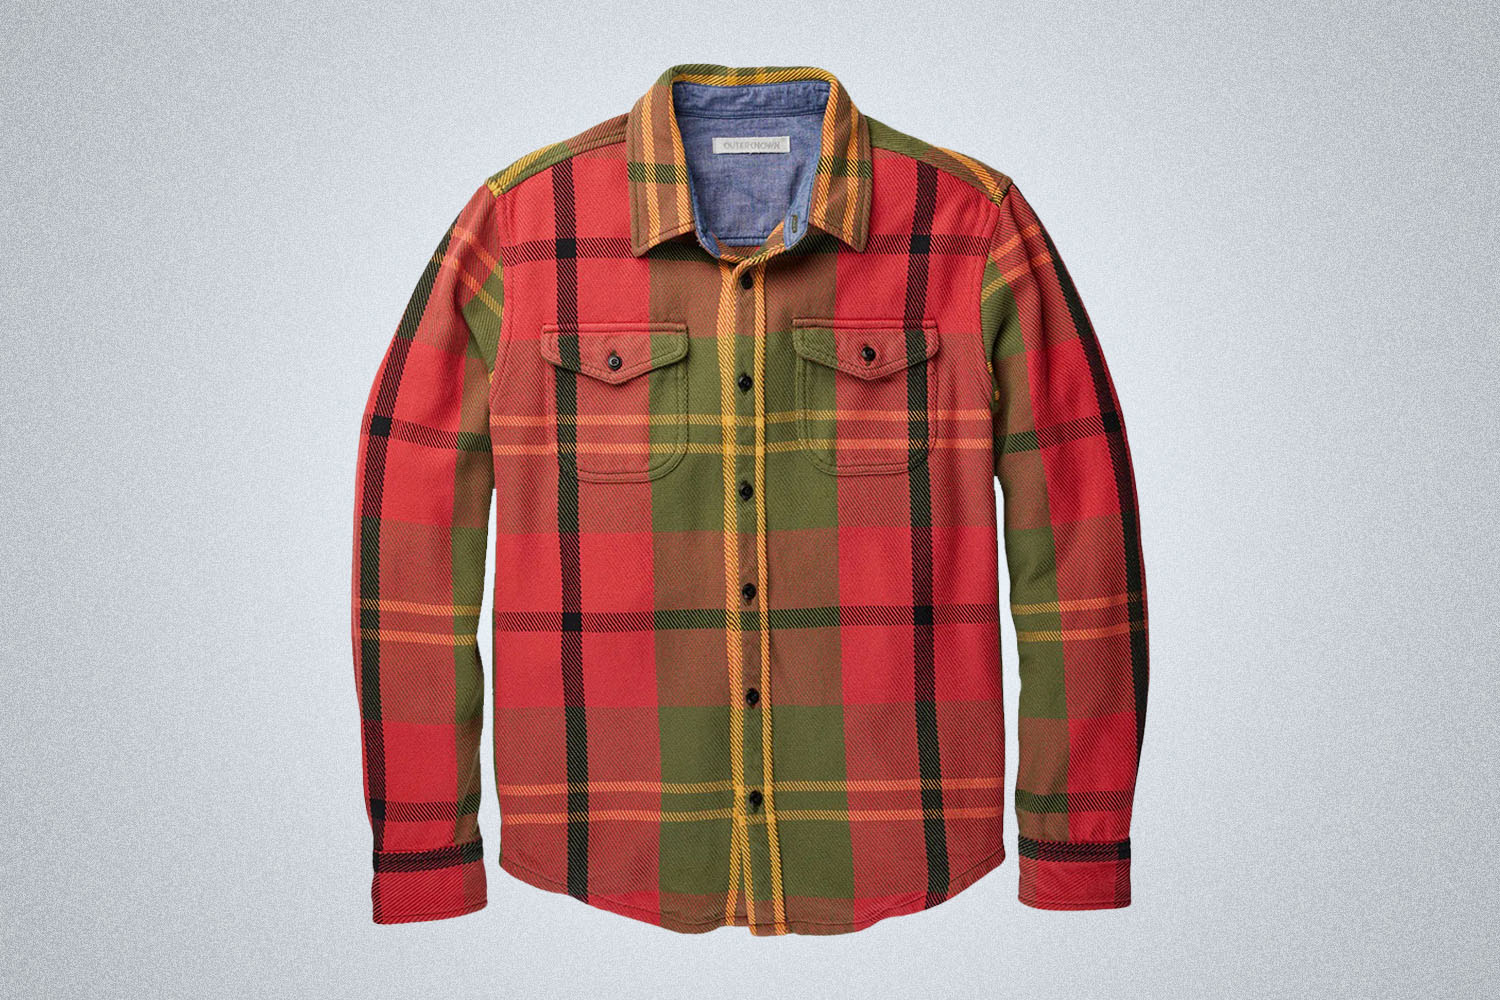 a red blanket shirt button-up from Outerknown on a grey background